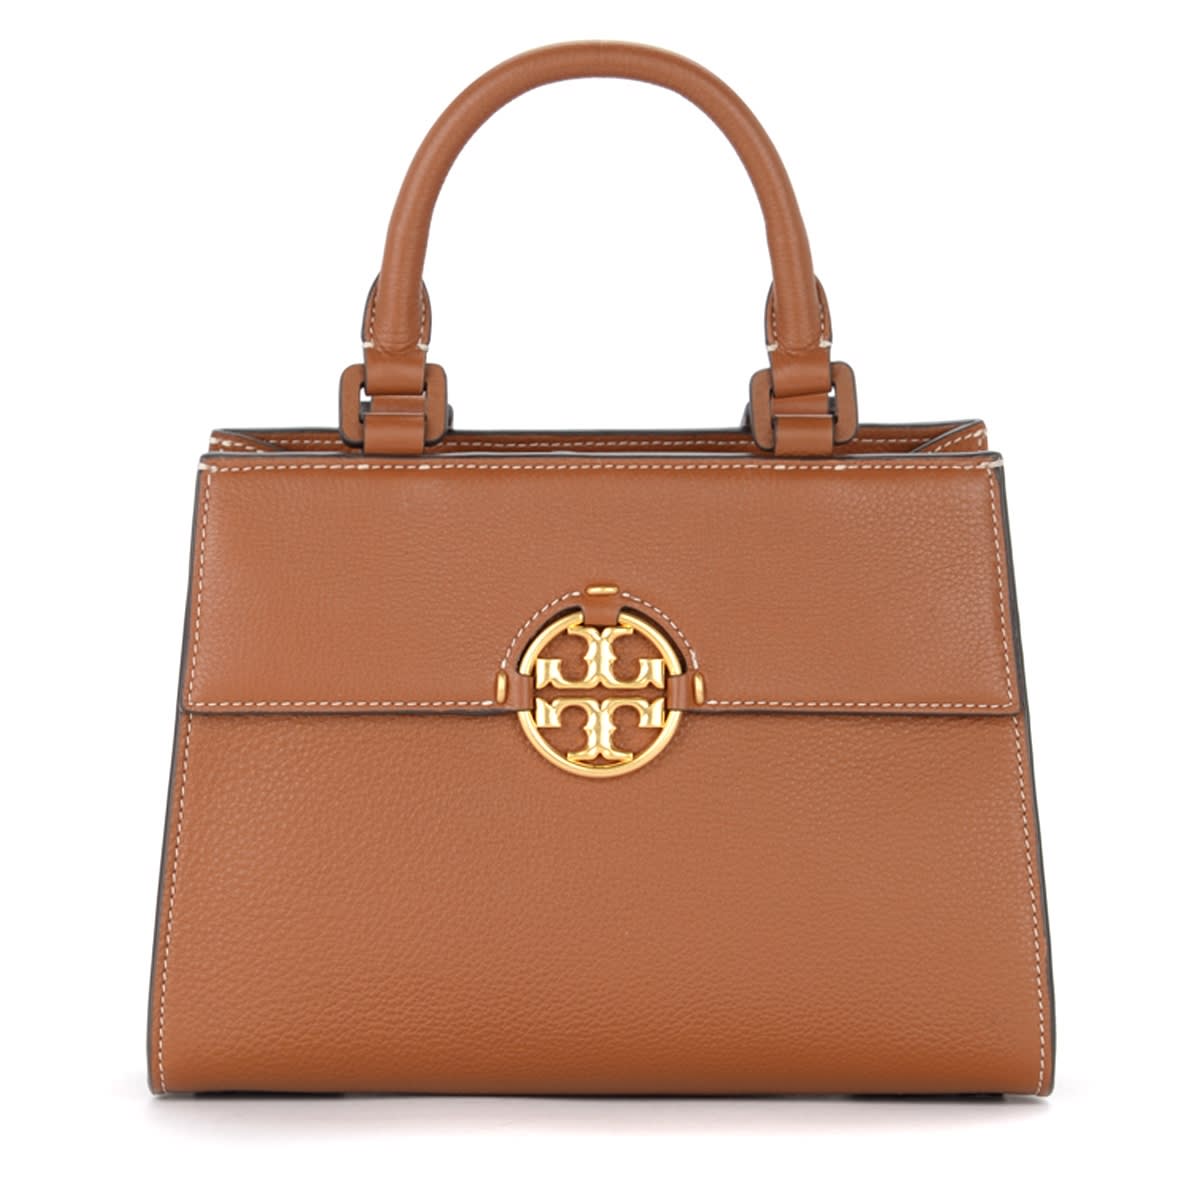 Tory Burch Satchel Bag In Leather Color Leather